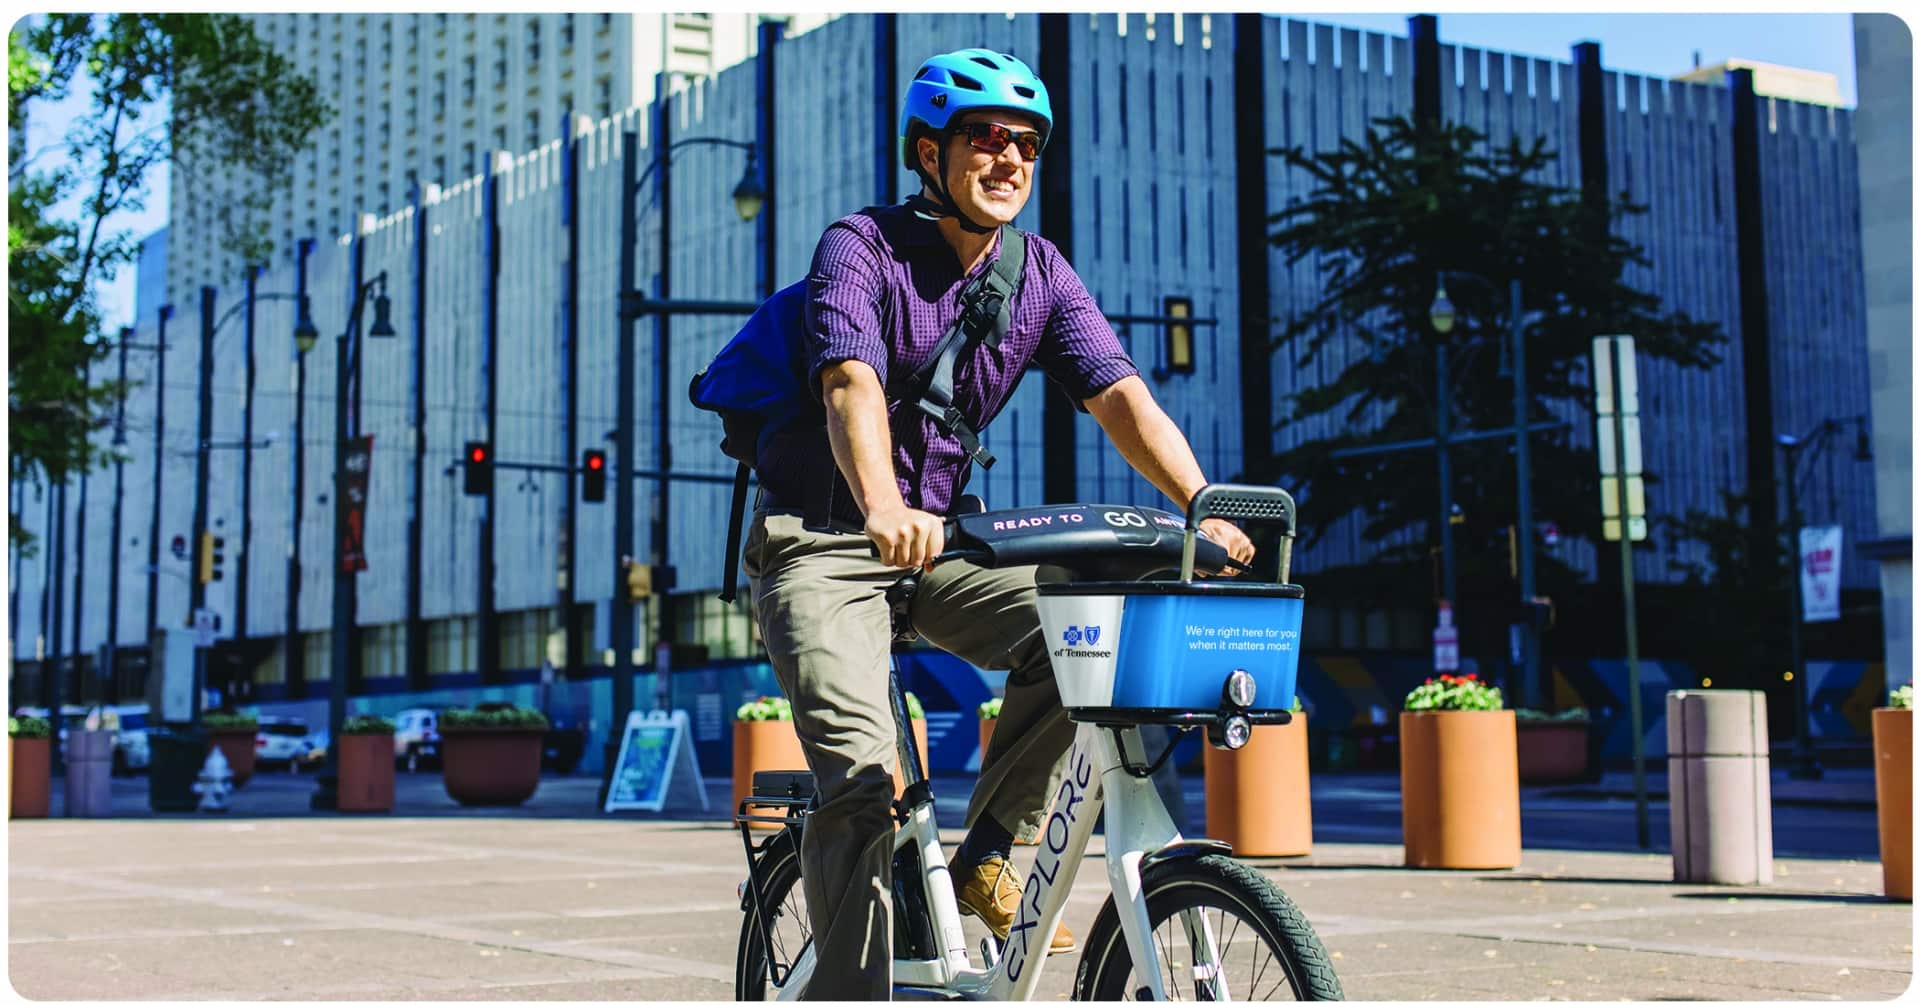 Enjoy sunshine and exercise with Explore Bike Share Memphis!